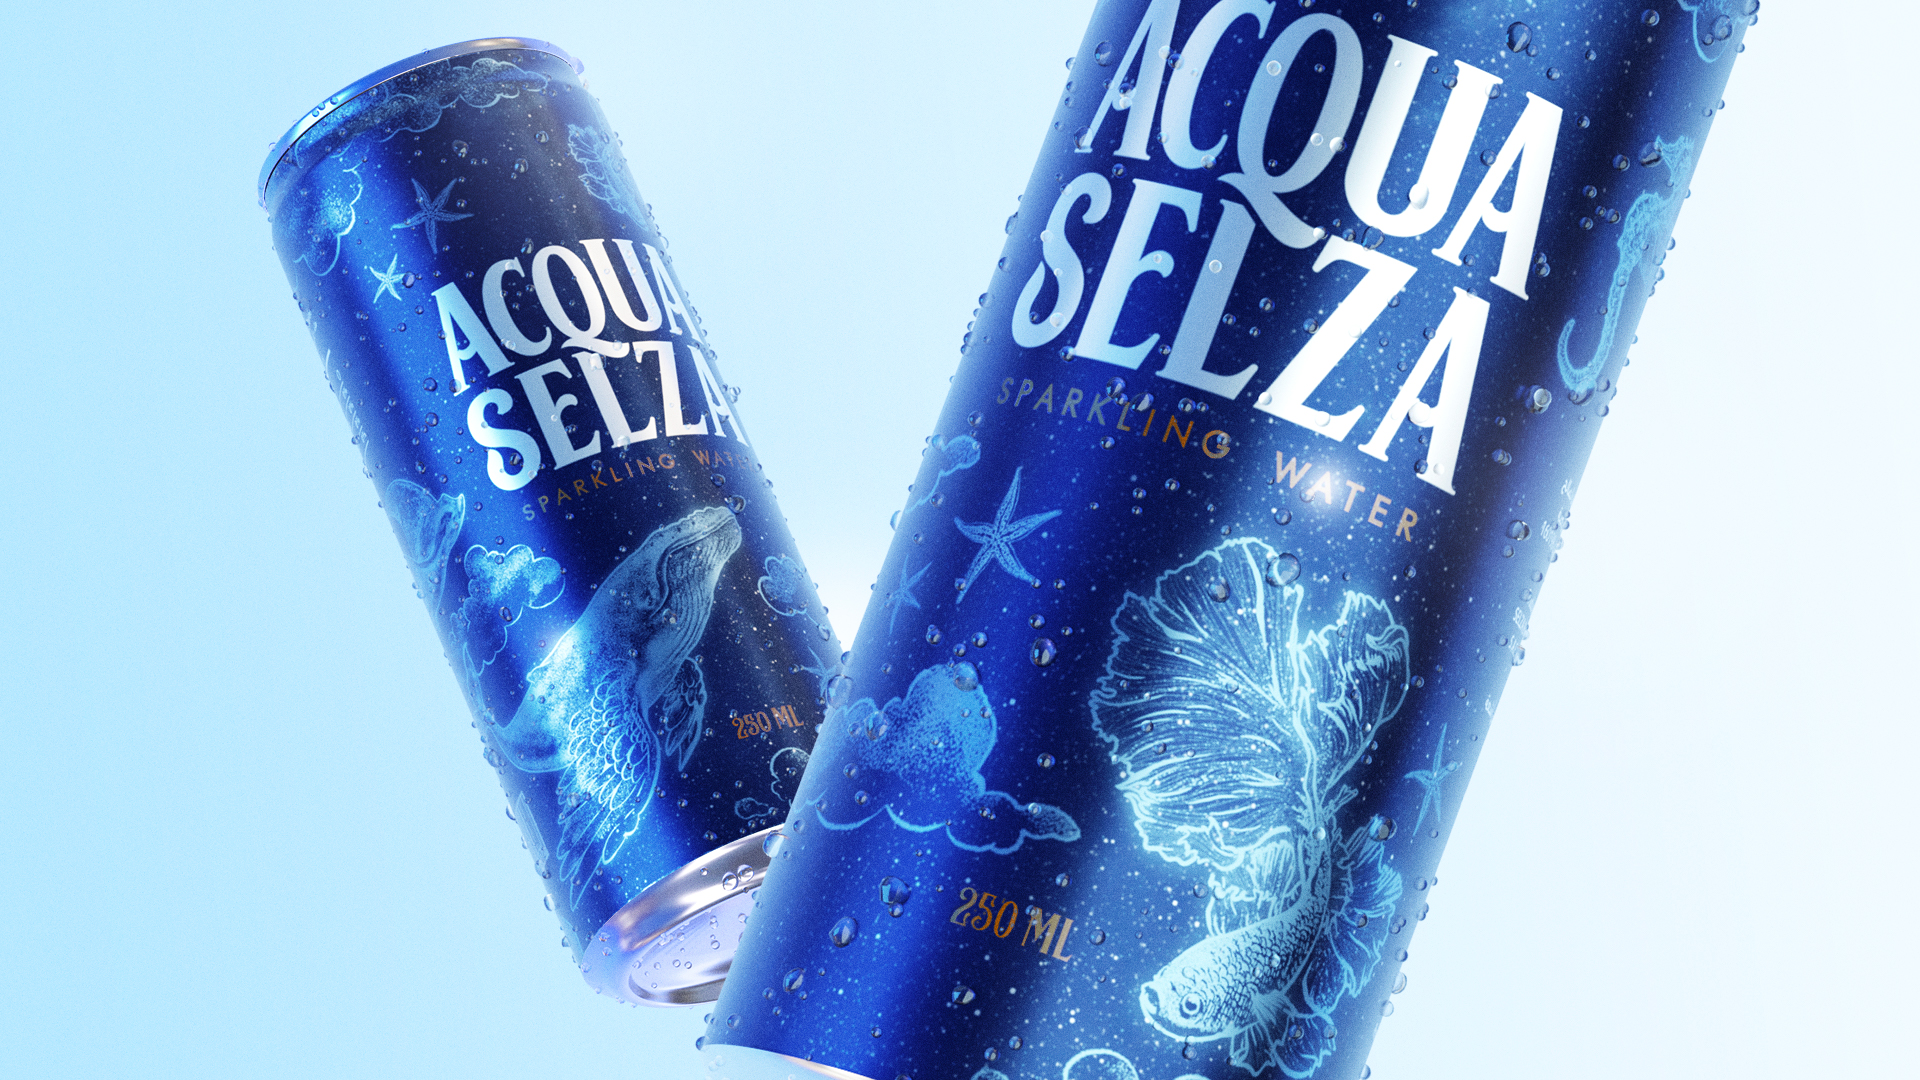 Acqua Selza Sparkling Water: Redefining The Category’s Consumption